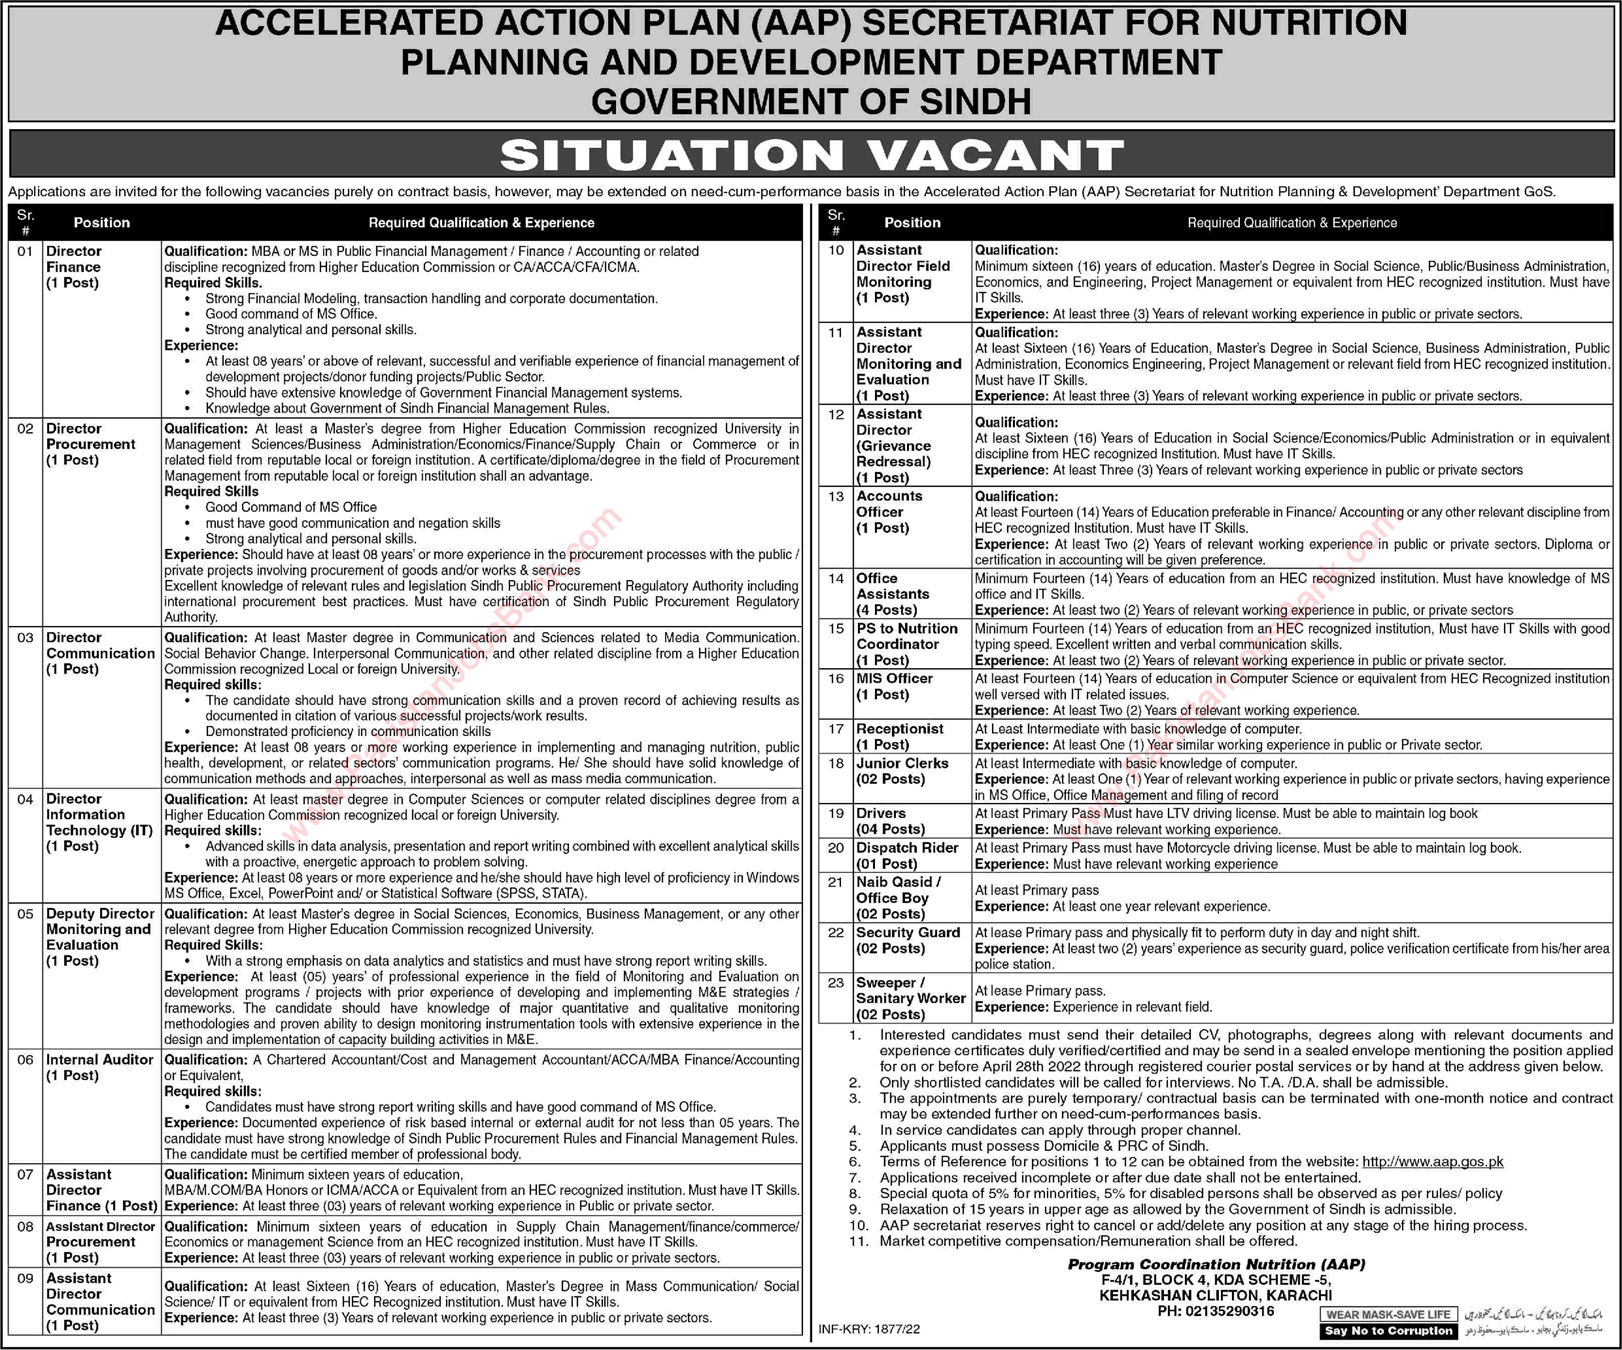 Planning and Development Department Sindh Jobs April 2022 Accelerated Action Plan AAP Latest